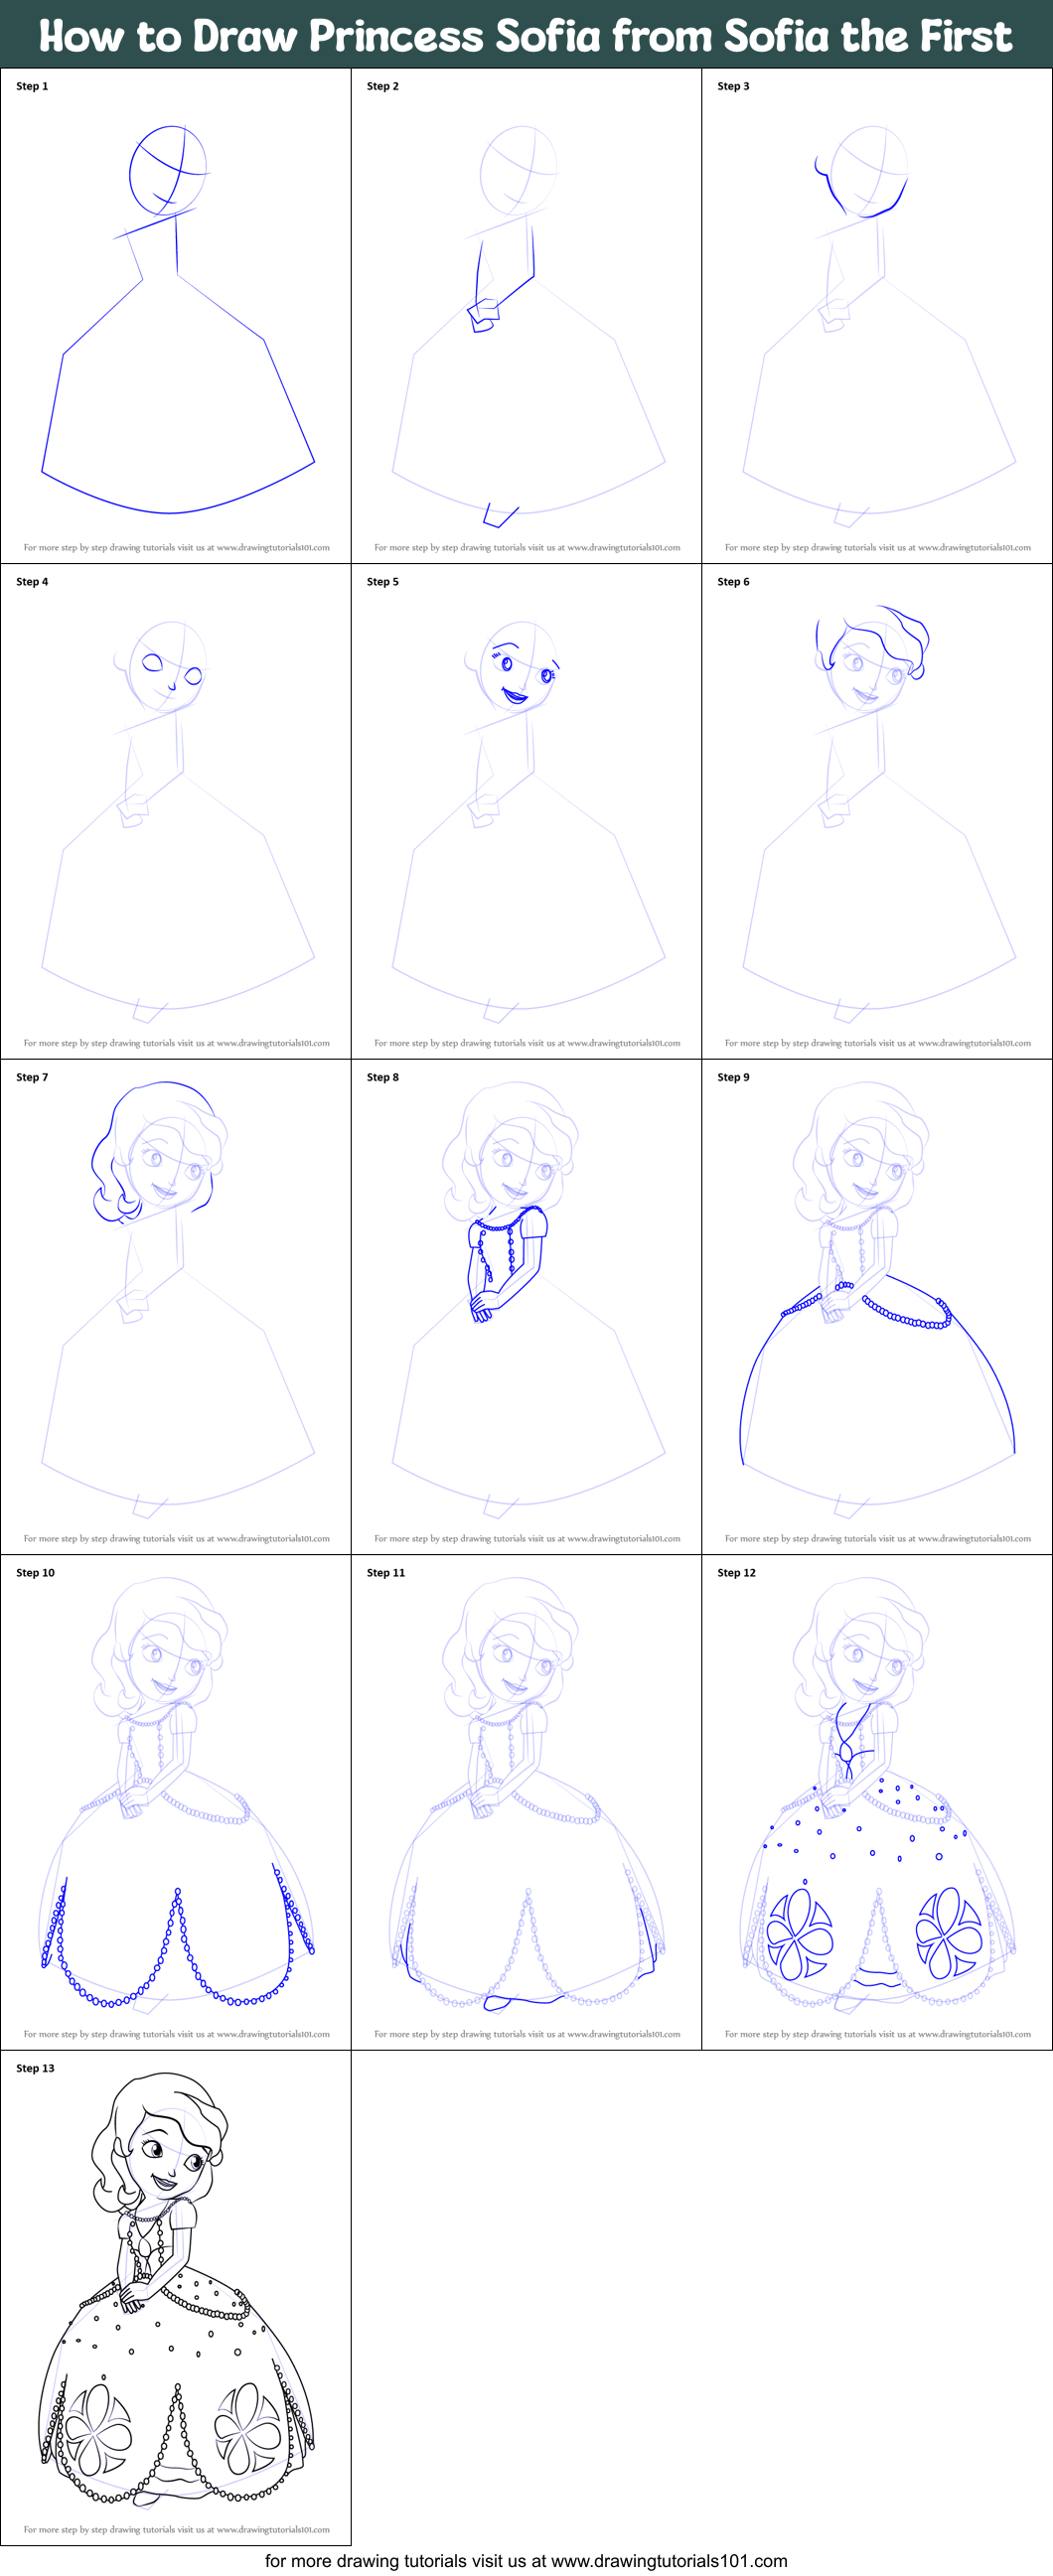 How to Draw Princess Sofia from Sofia the First printable step by step